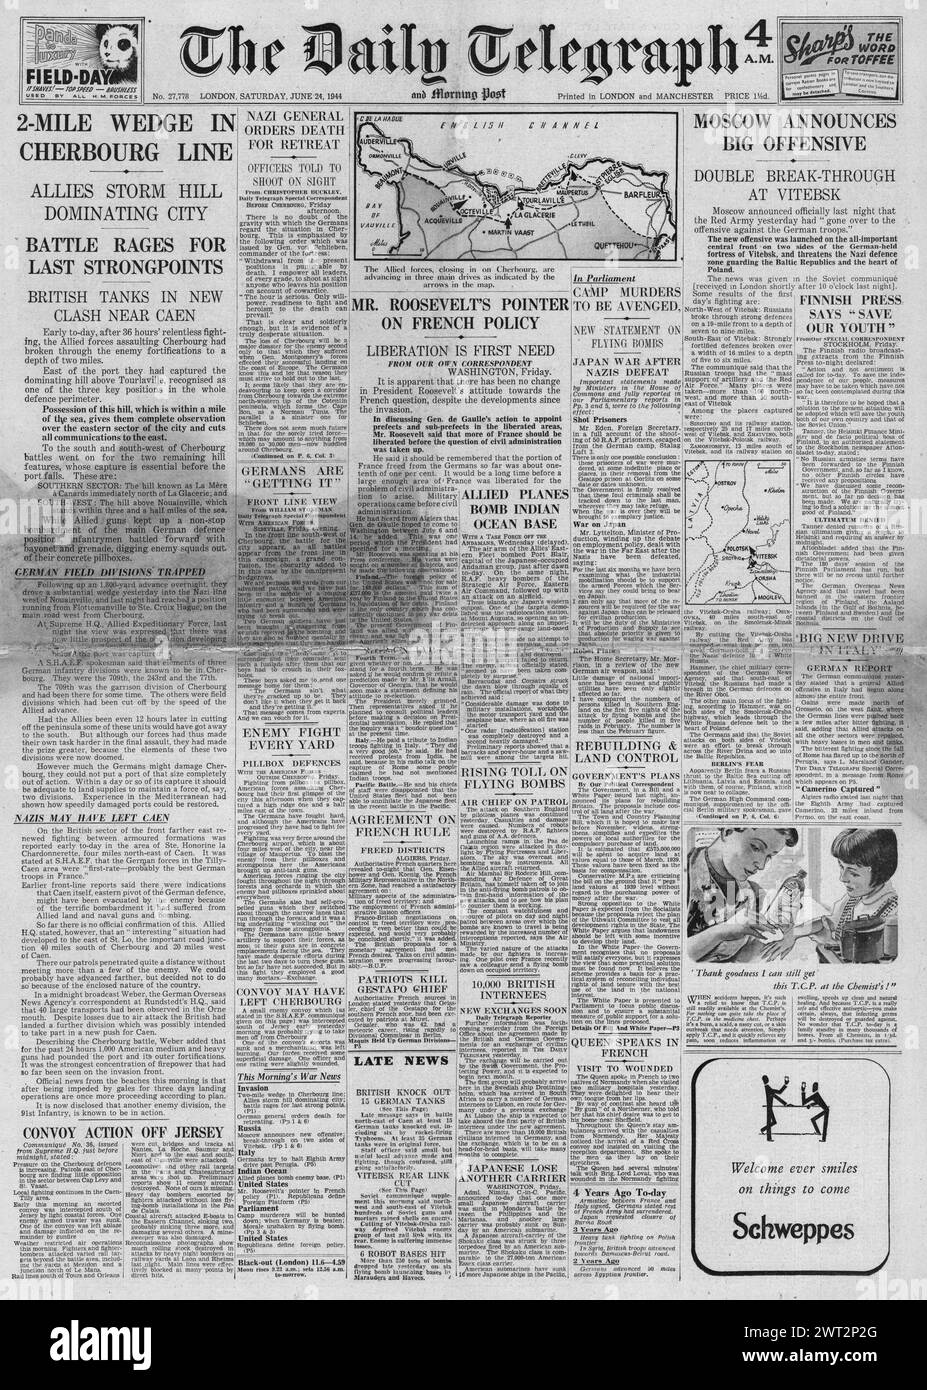 1944 The Daily Telegraph front page reporting Battle for Cherbourg, escapee RAF officers executed by Gestapo, Red Army advance on Vitebsk and tank battle near Caen Stock Photo